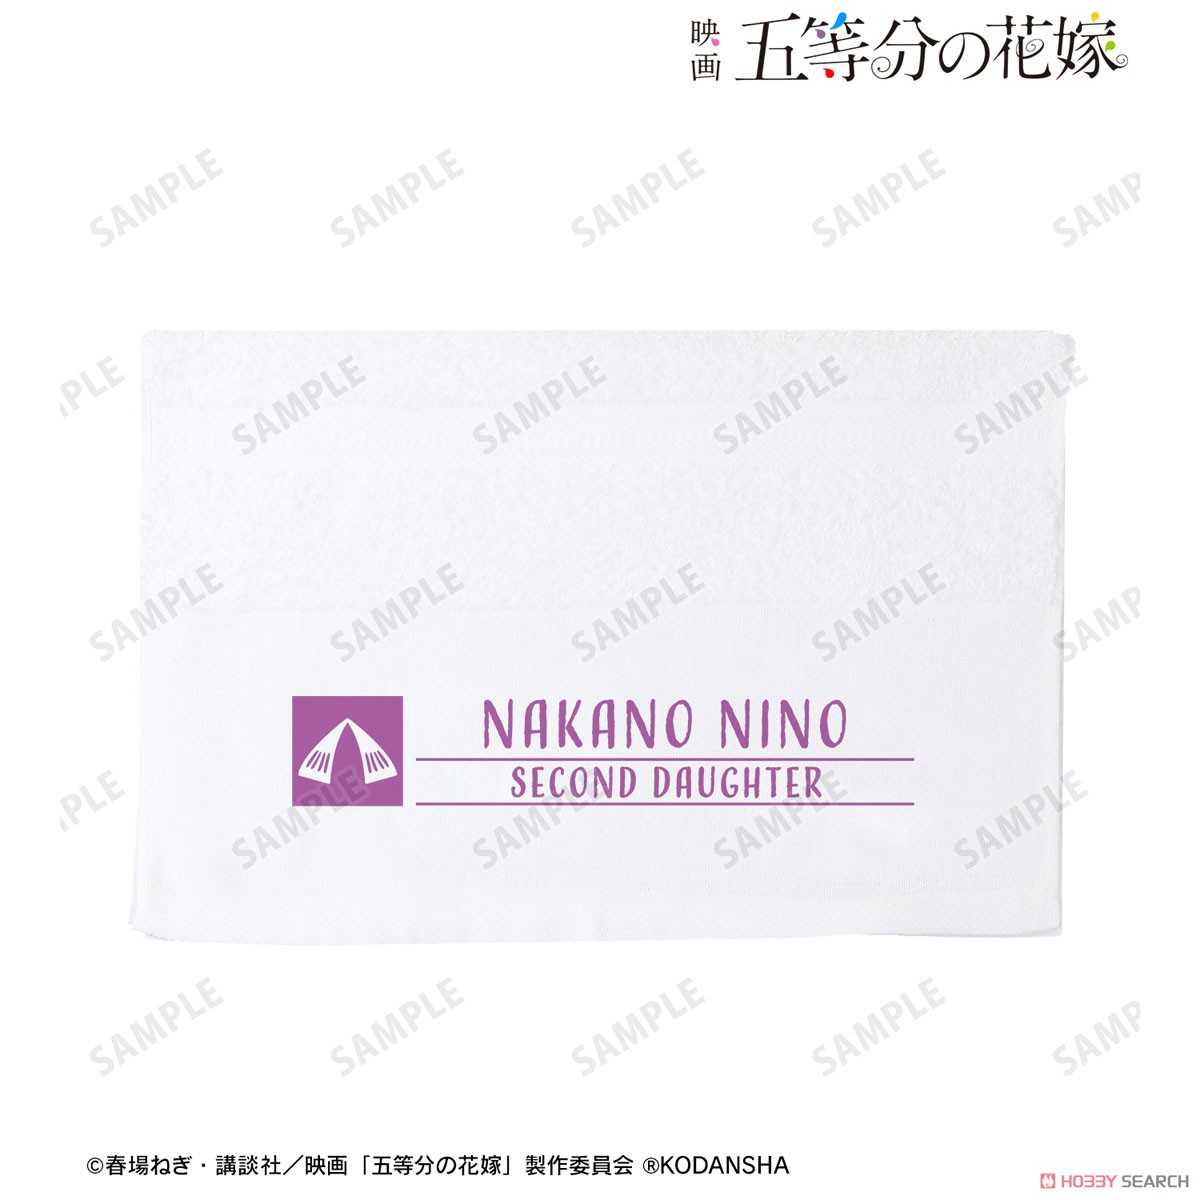 [The Quintessential Quintuplets Movie] Tobu Zoo Collaboration [Especially Illustrated] Nino Nakano Safari Look Ver. Small Gift Towel (Anime Toy) Item picture1